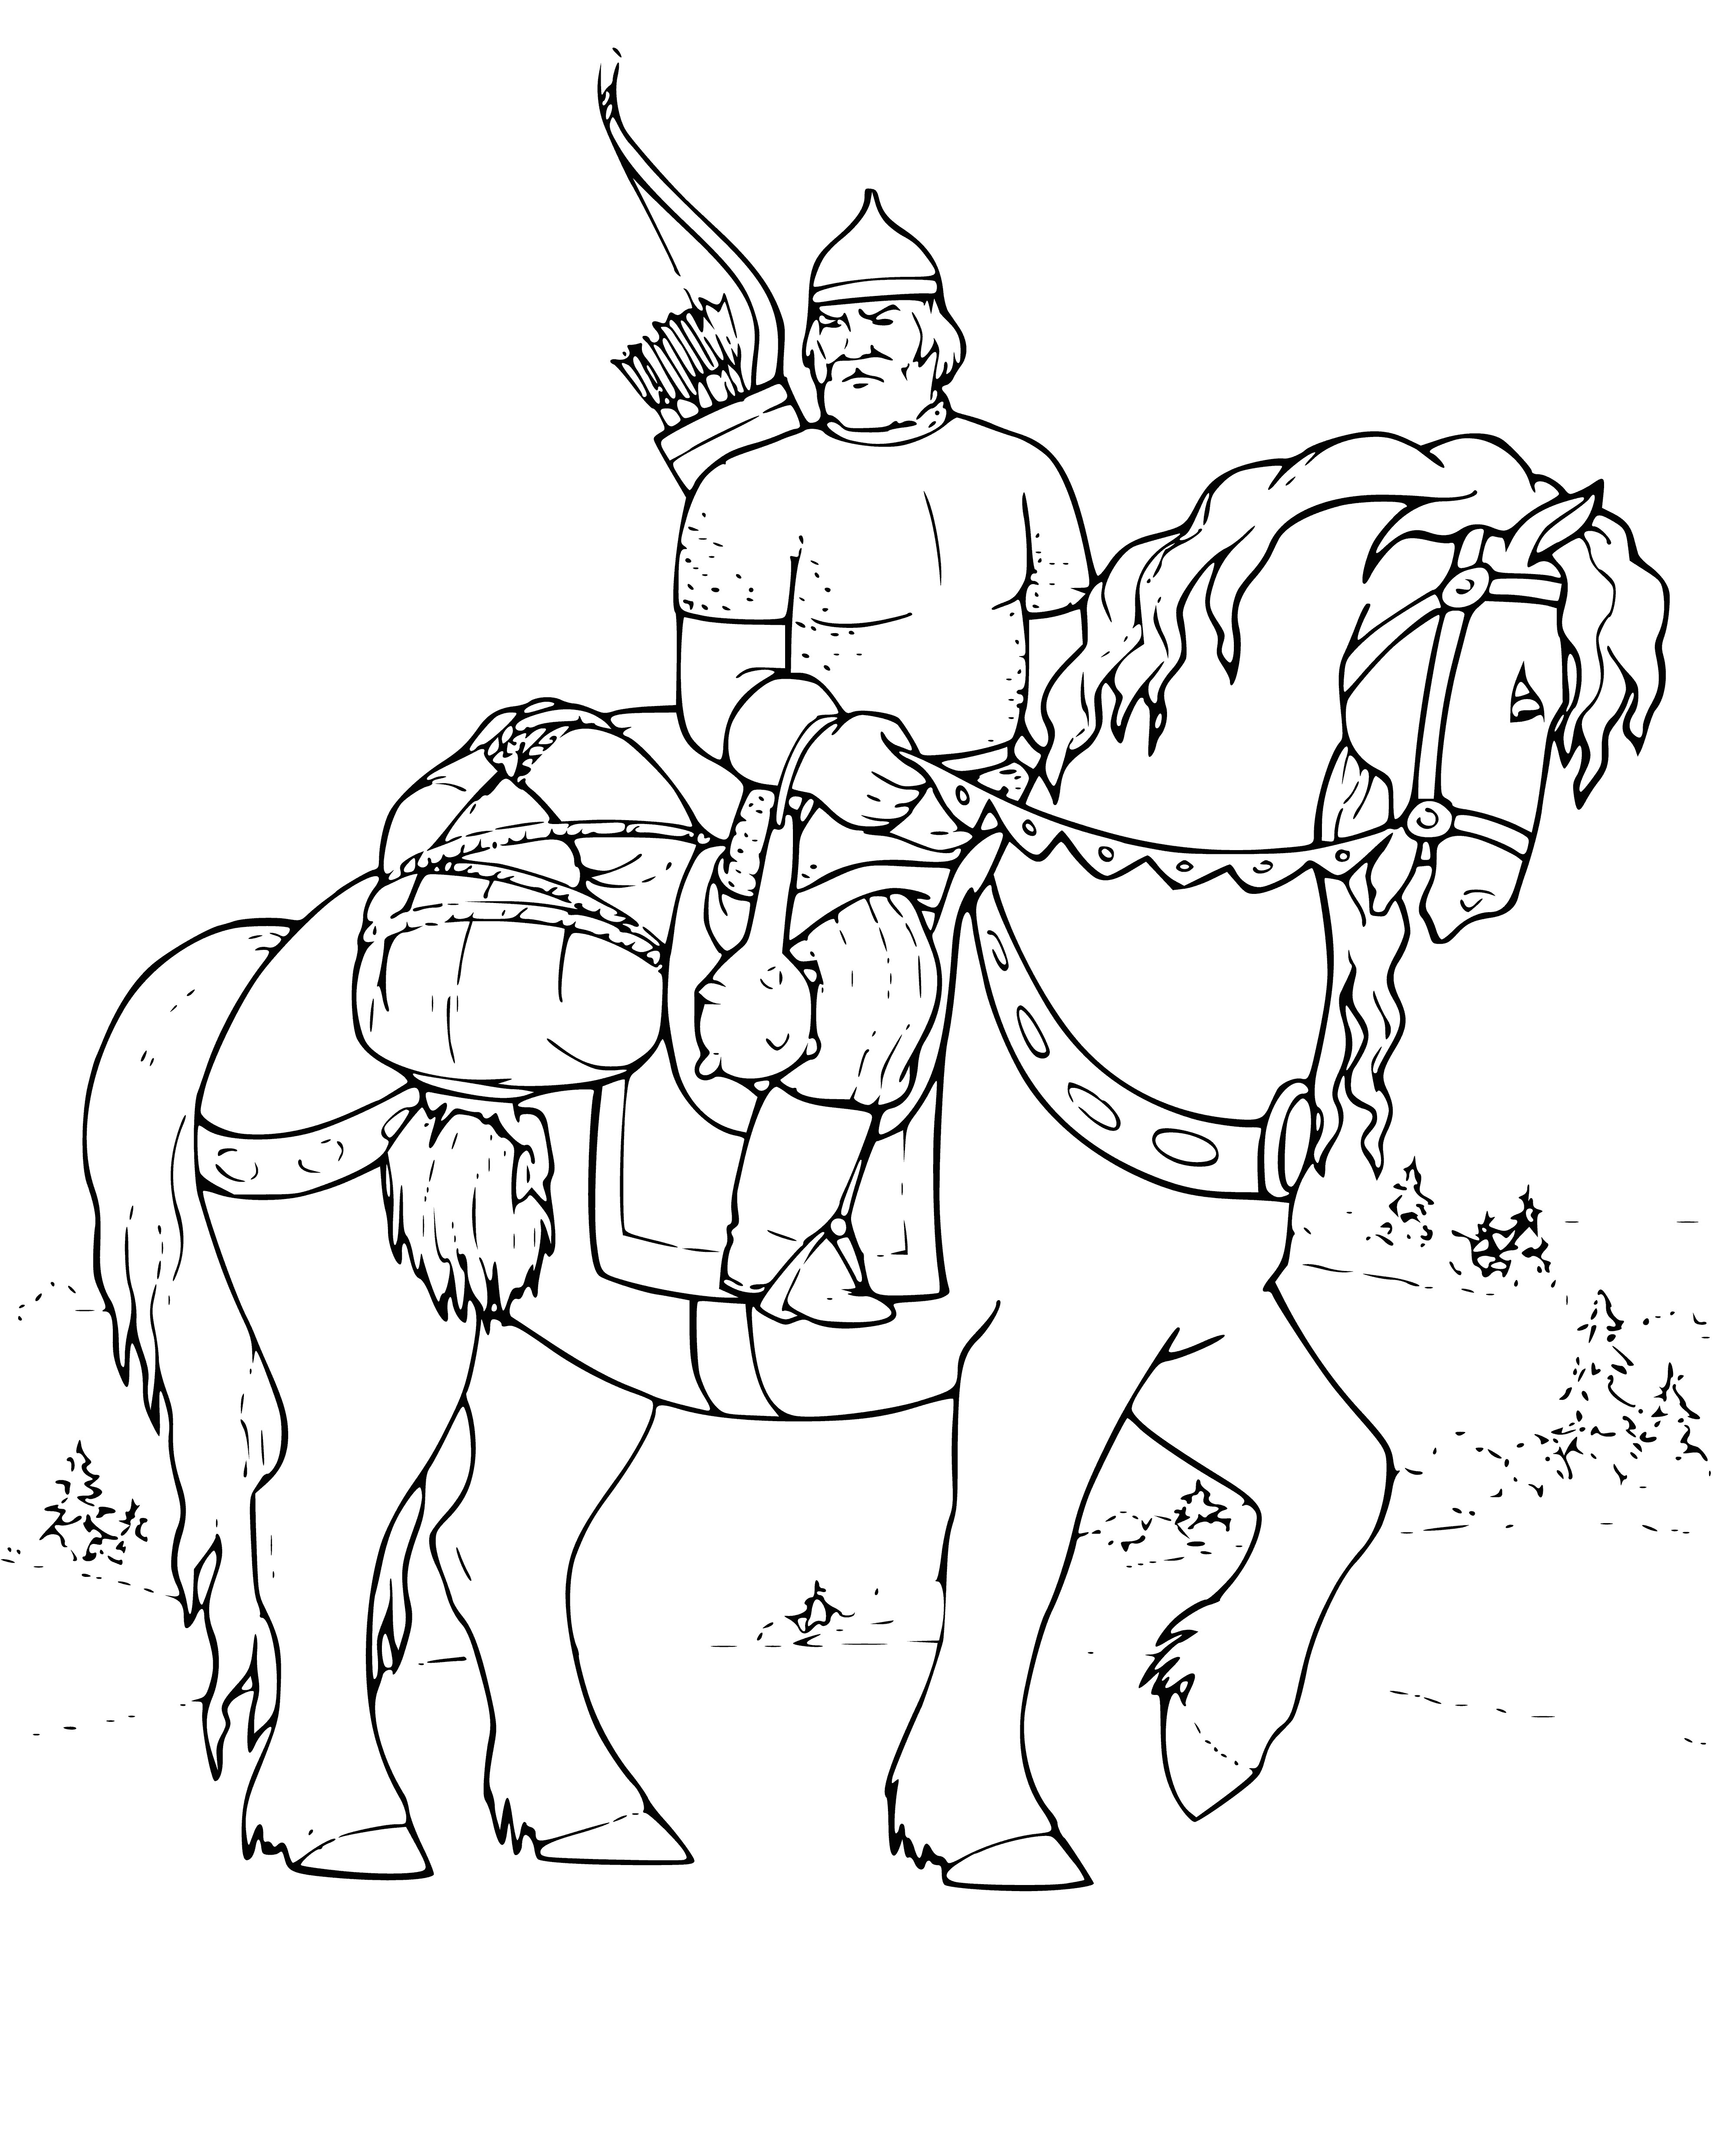 coloring page: Brave warrior Bogatyr in armor with sword, shield with cross, and a horse behind him is a traditional Russian hero in folk tales.